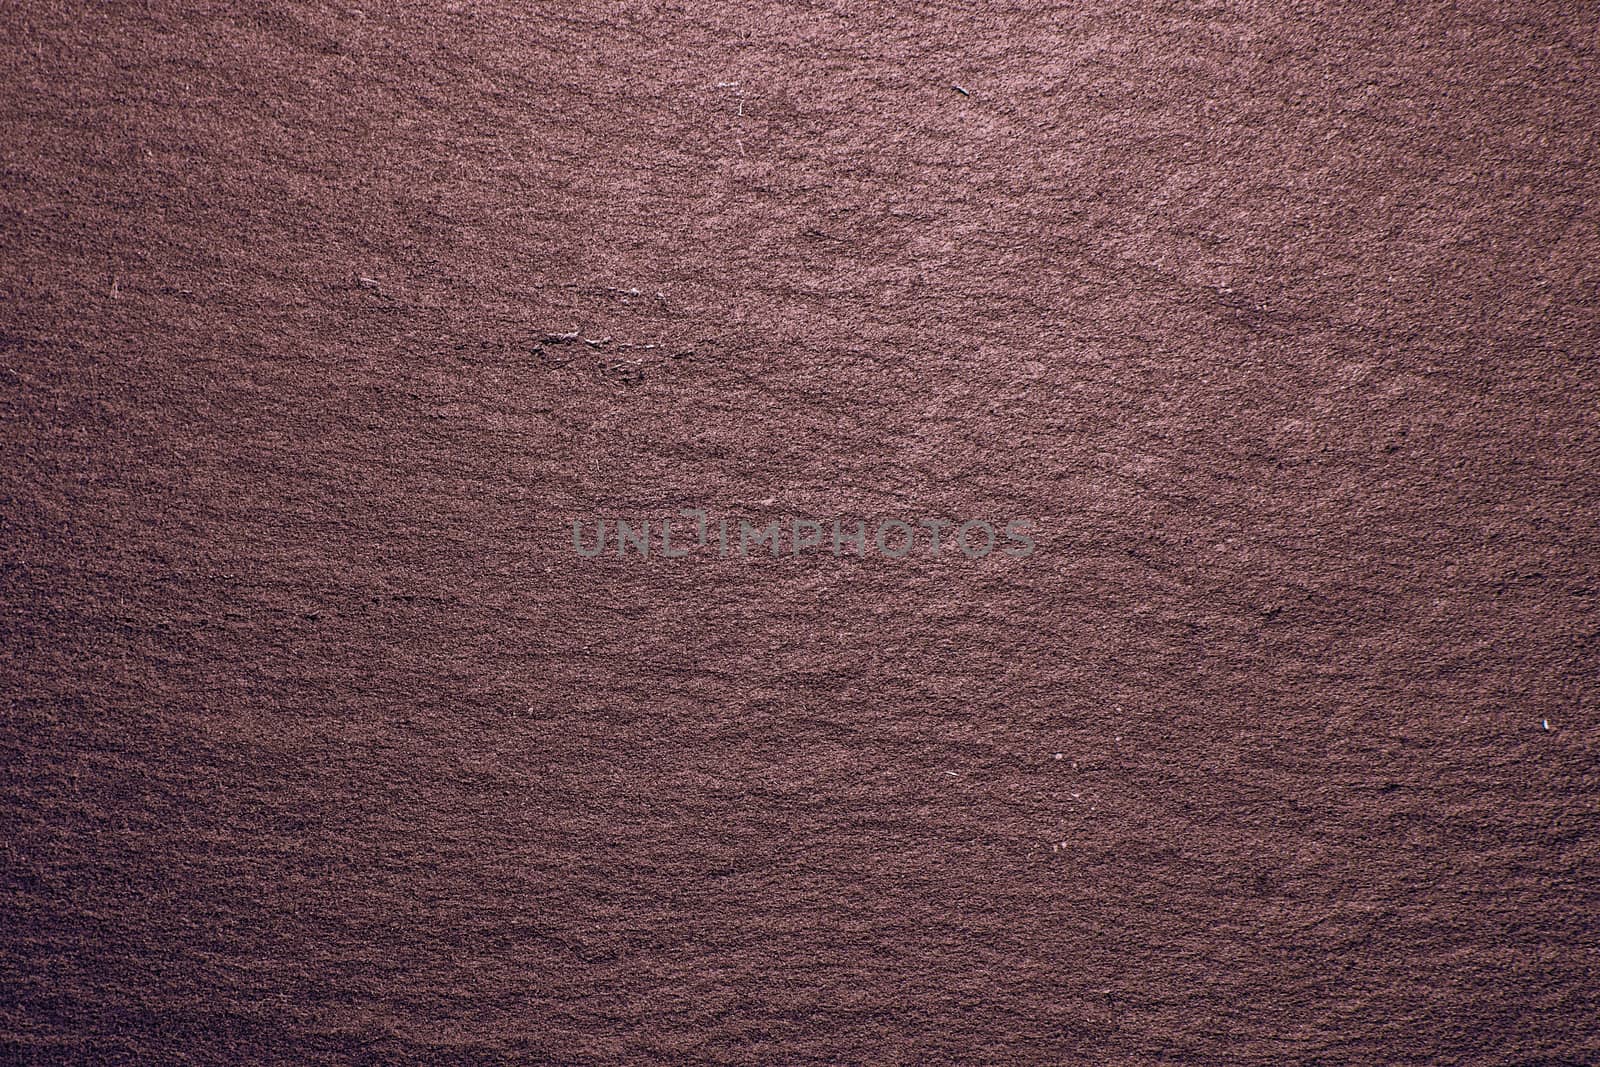 Pink Slate Tray Texture background. texture of natural black slate rock